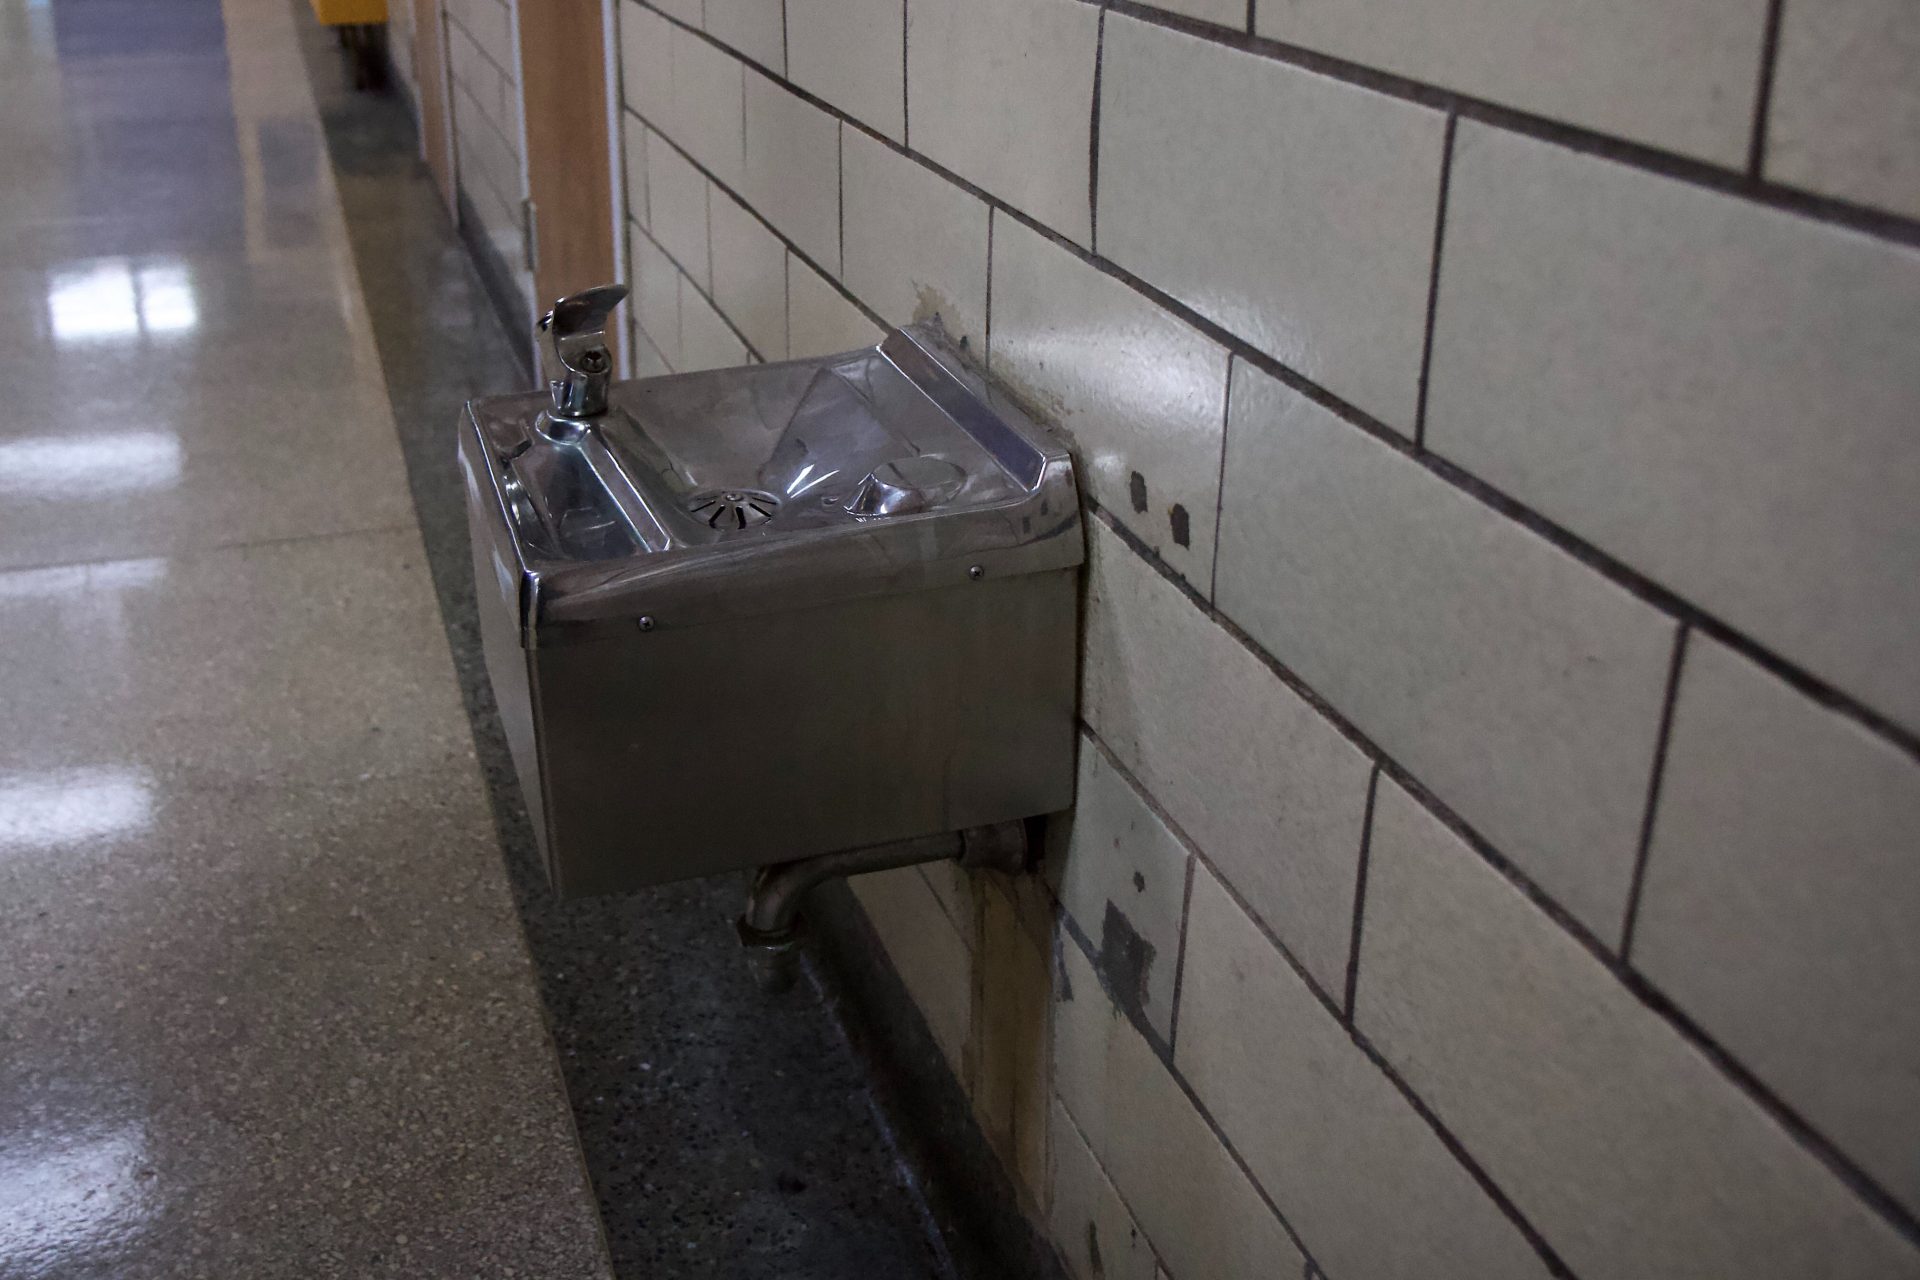 Water fountains at the Frederick Douglass Elementary in Philadelphia are turned off.